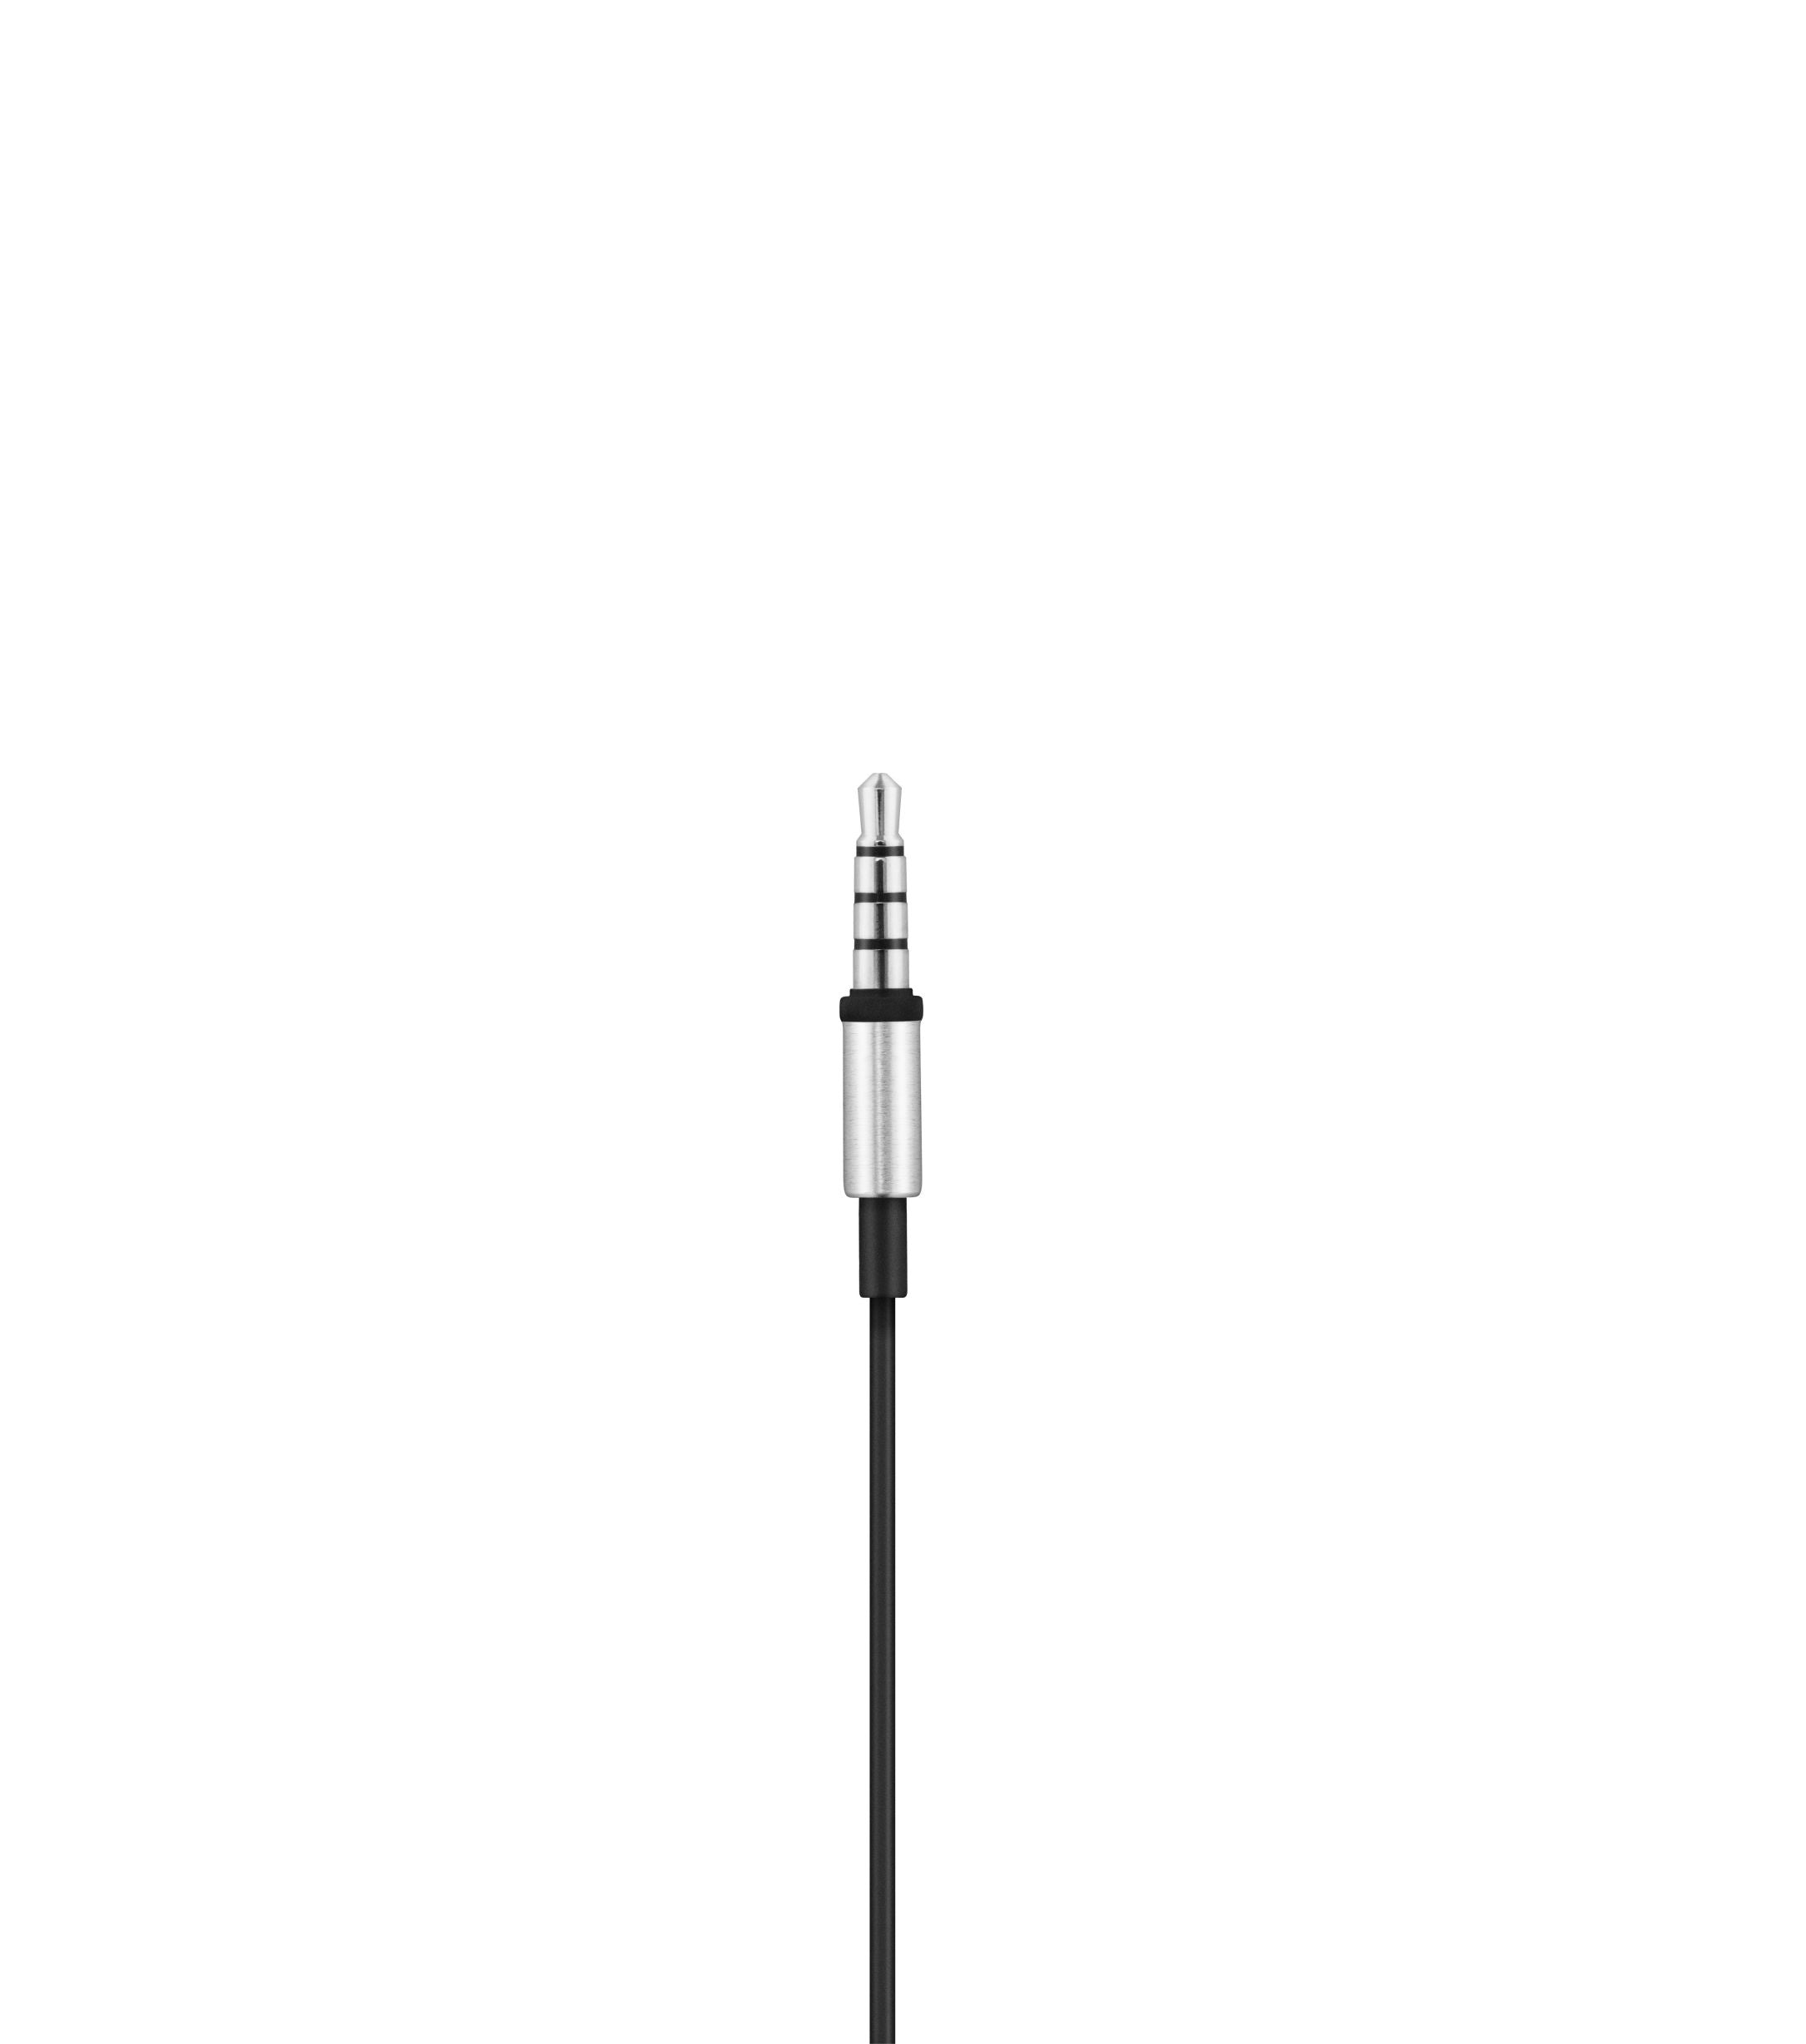 Bang & Olufsen Beoplay H3 In-Ear Headphones aux input